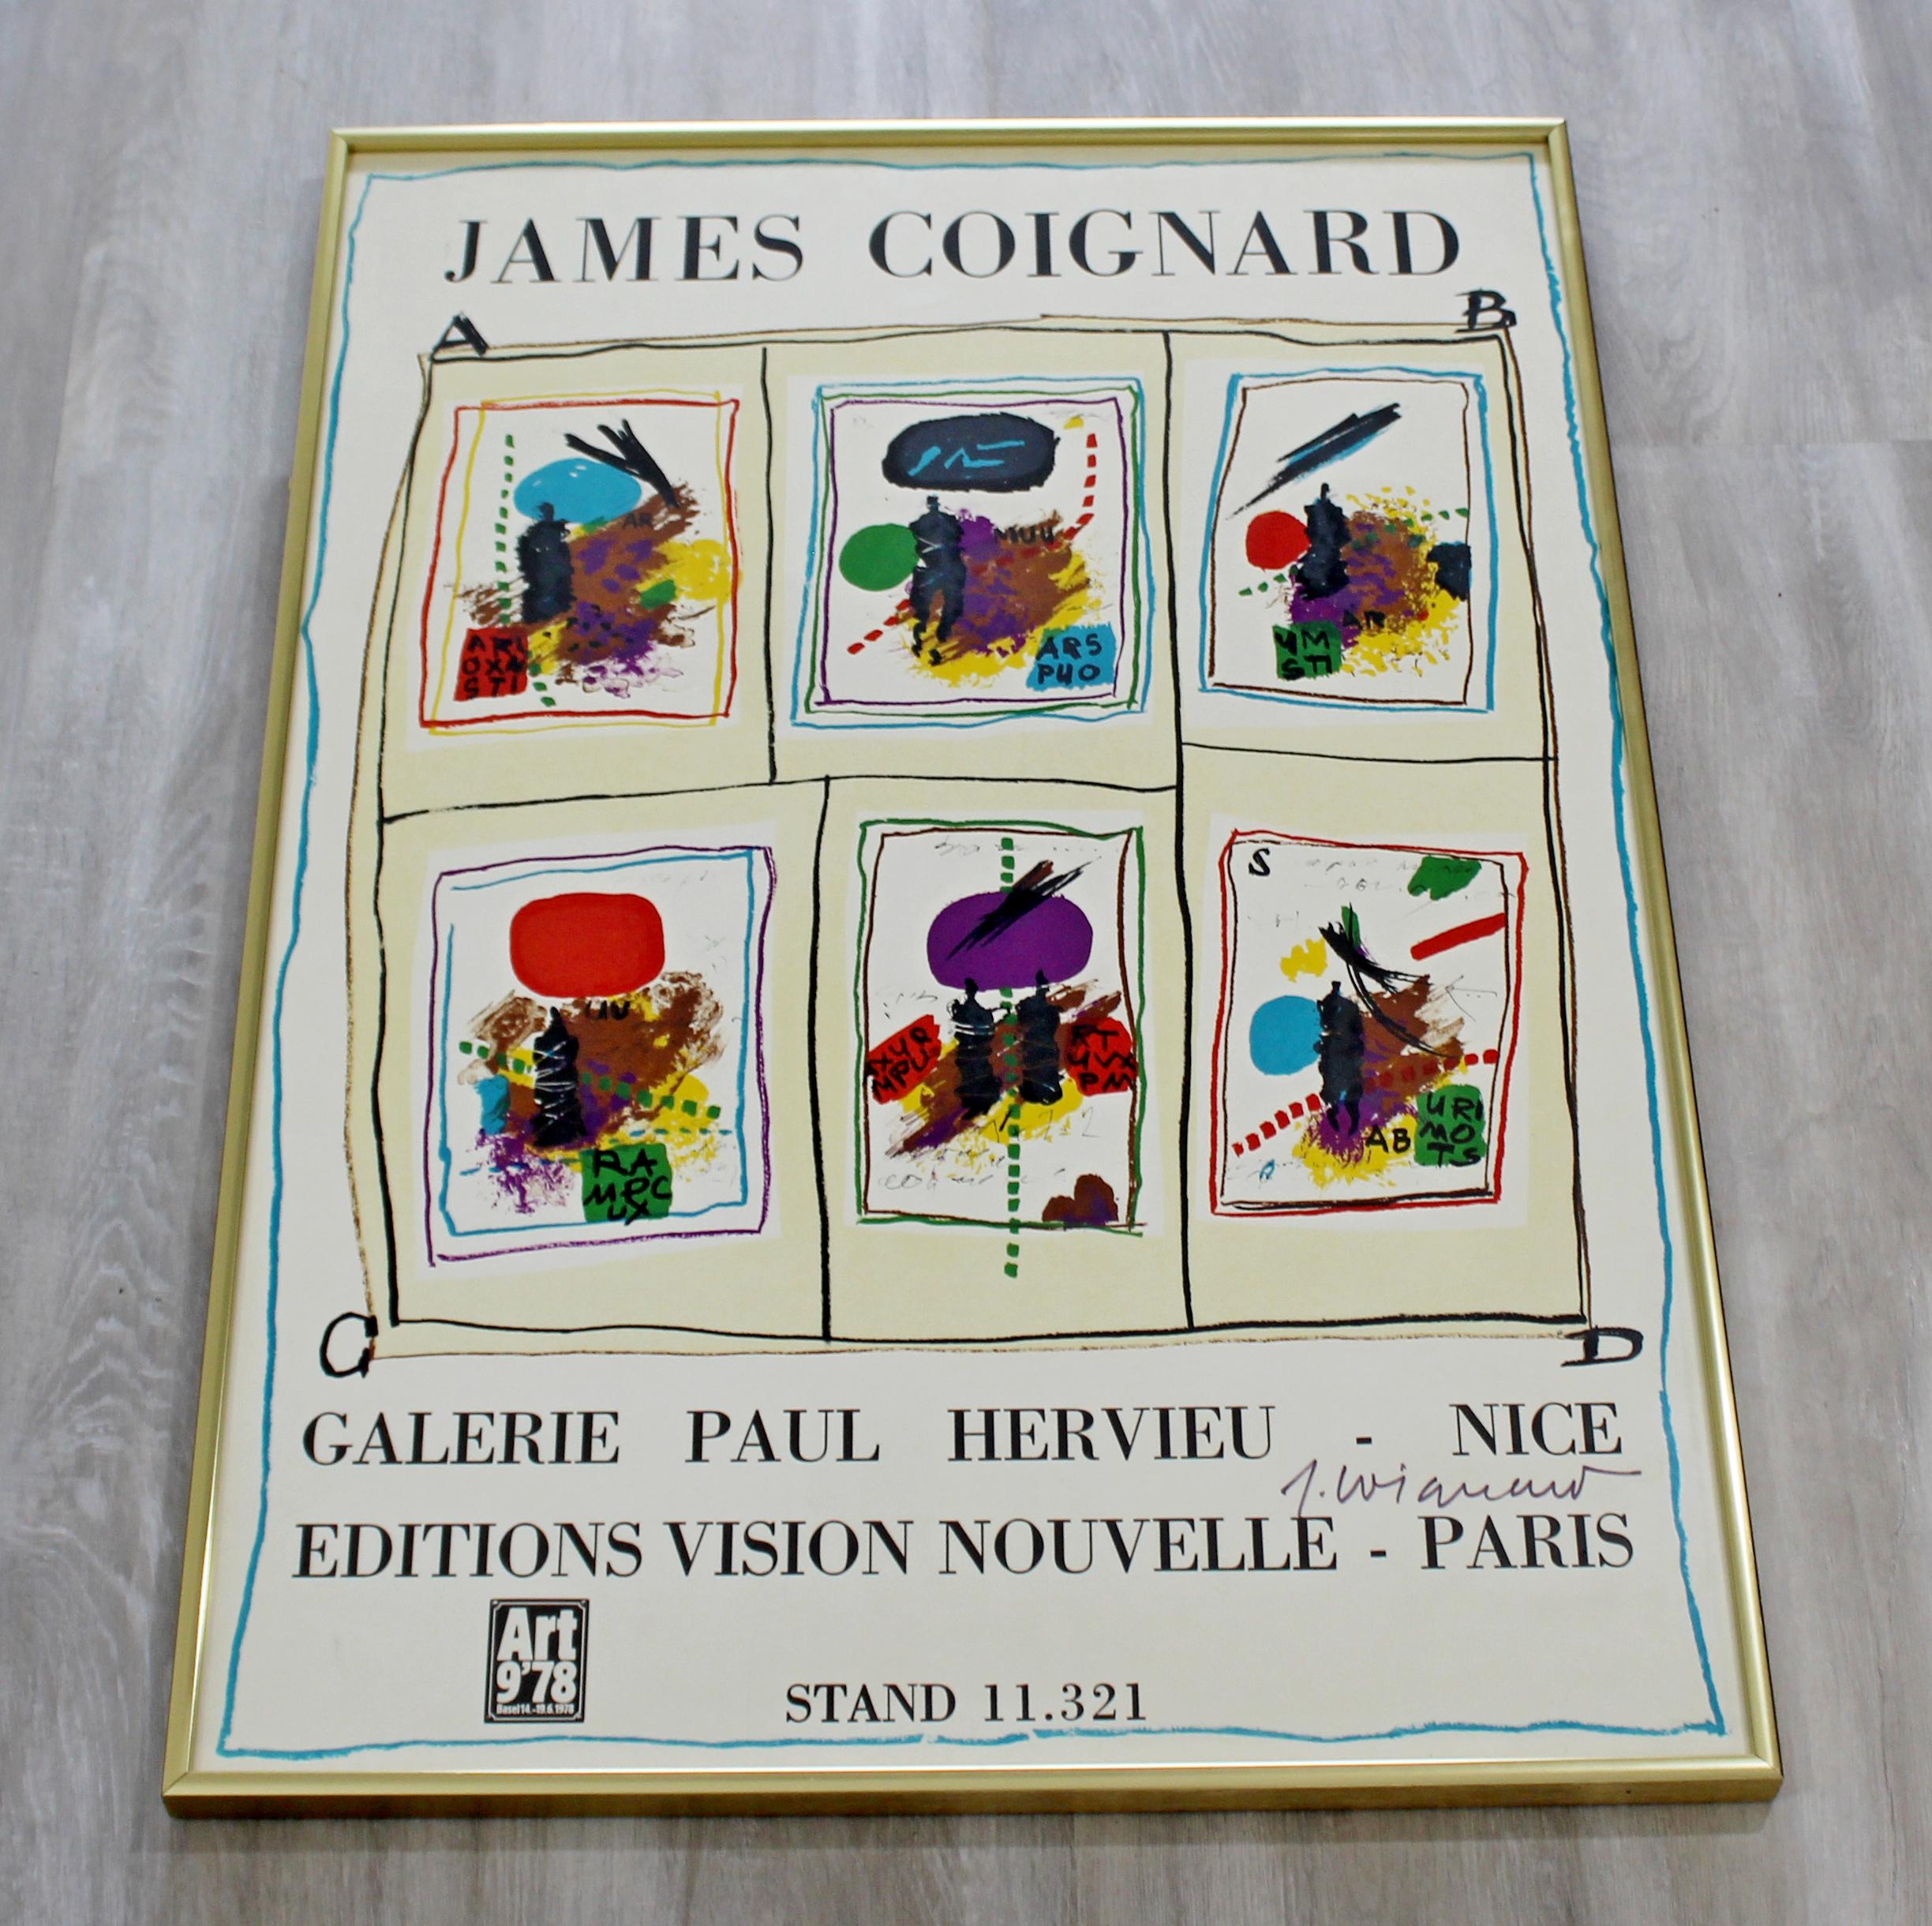 For your consideration is a framed poster, signed by James Coignard, circa 1978. In excellent condition. The dimensions are 20